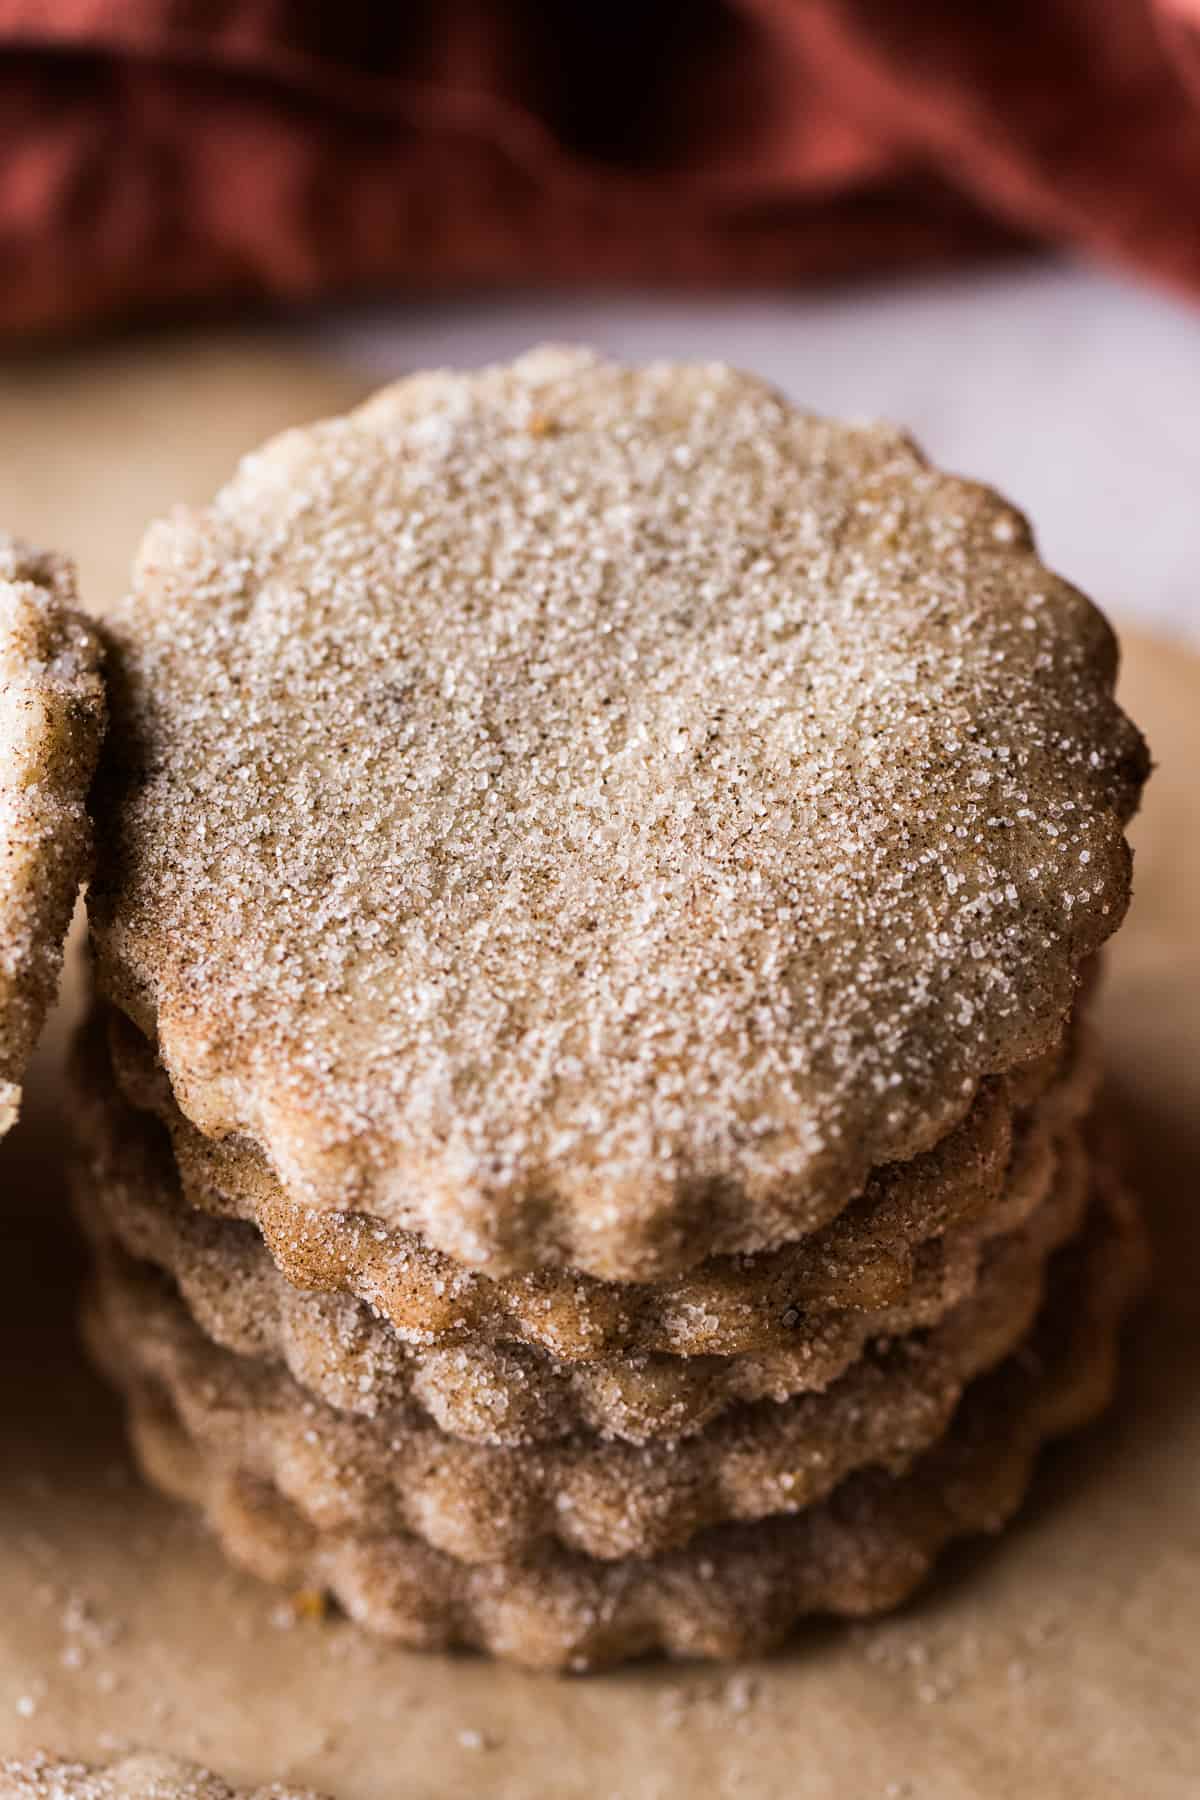 Biscochitos stacked on top of one another coated in cinnamon sugar.